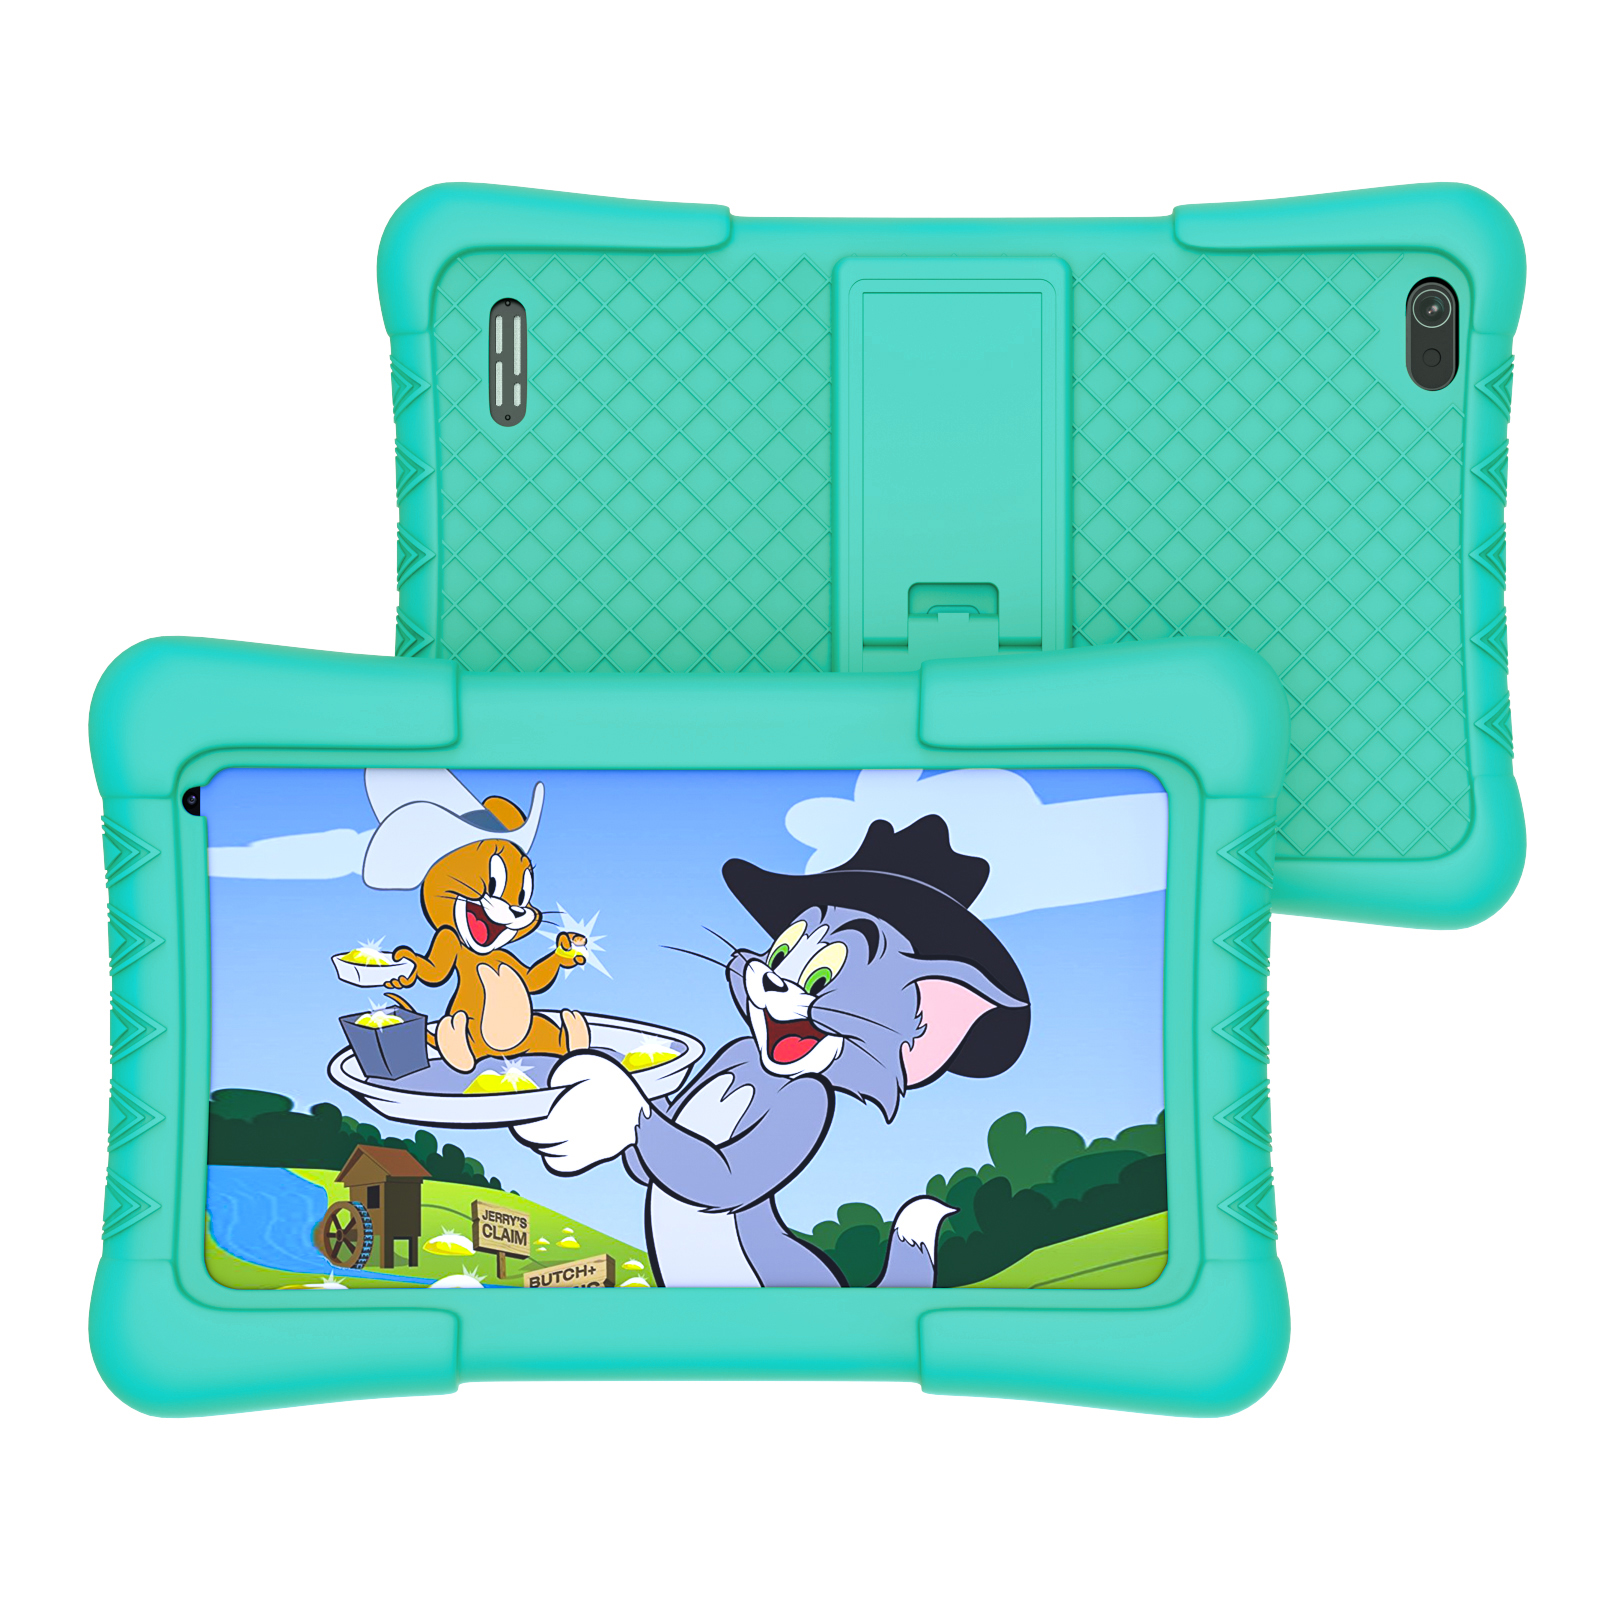 Kids Tablet 7 inch, 2GB RAM, 32GB ROM, Android 11, Kids App Pre Installed, 1.8GHz Quad Core Processor, IPS HD Display, 7” Android Tablet, WiFi, Kid-Proof Case, Green